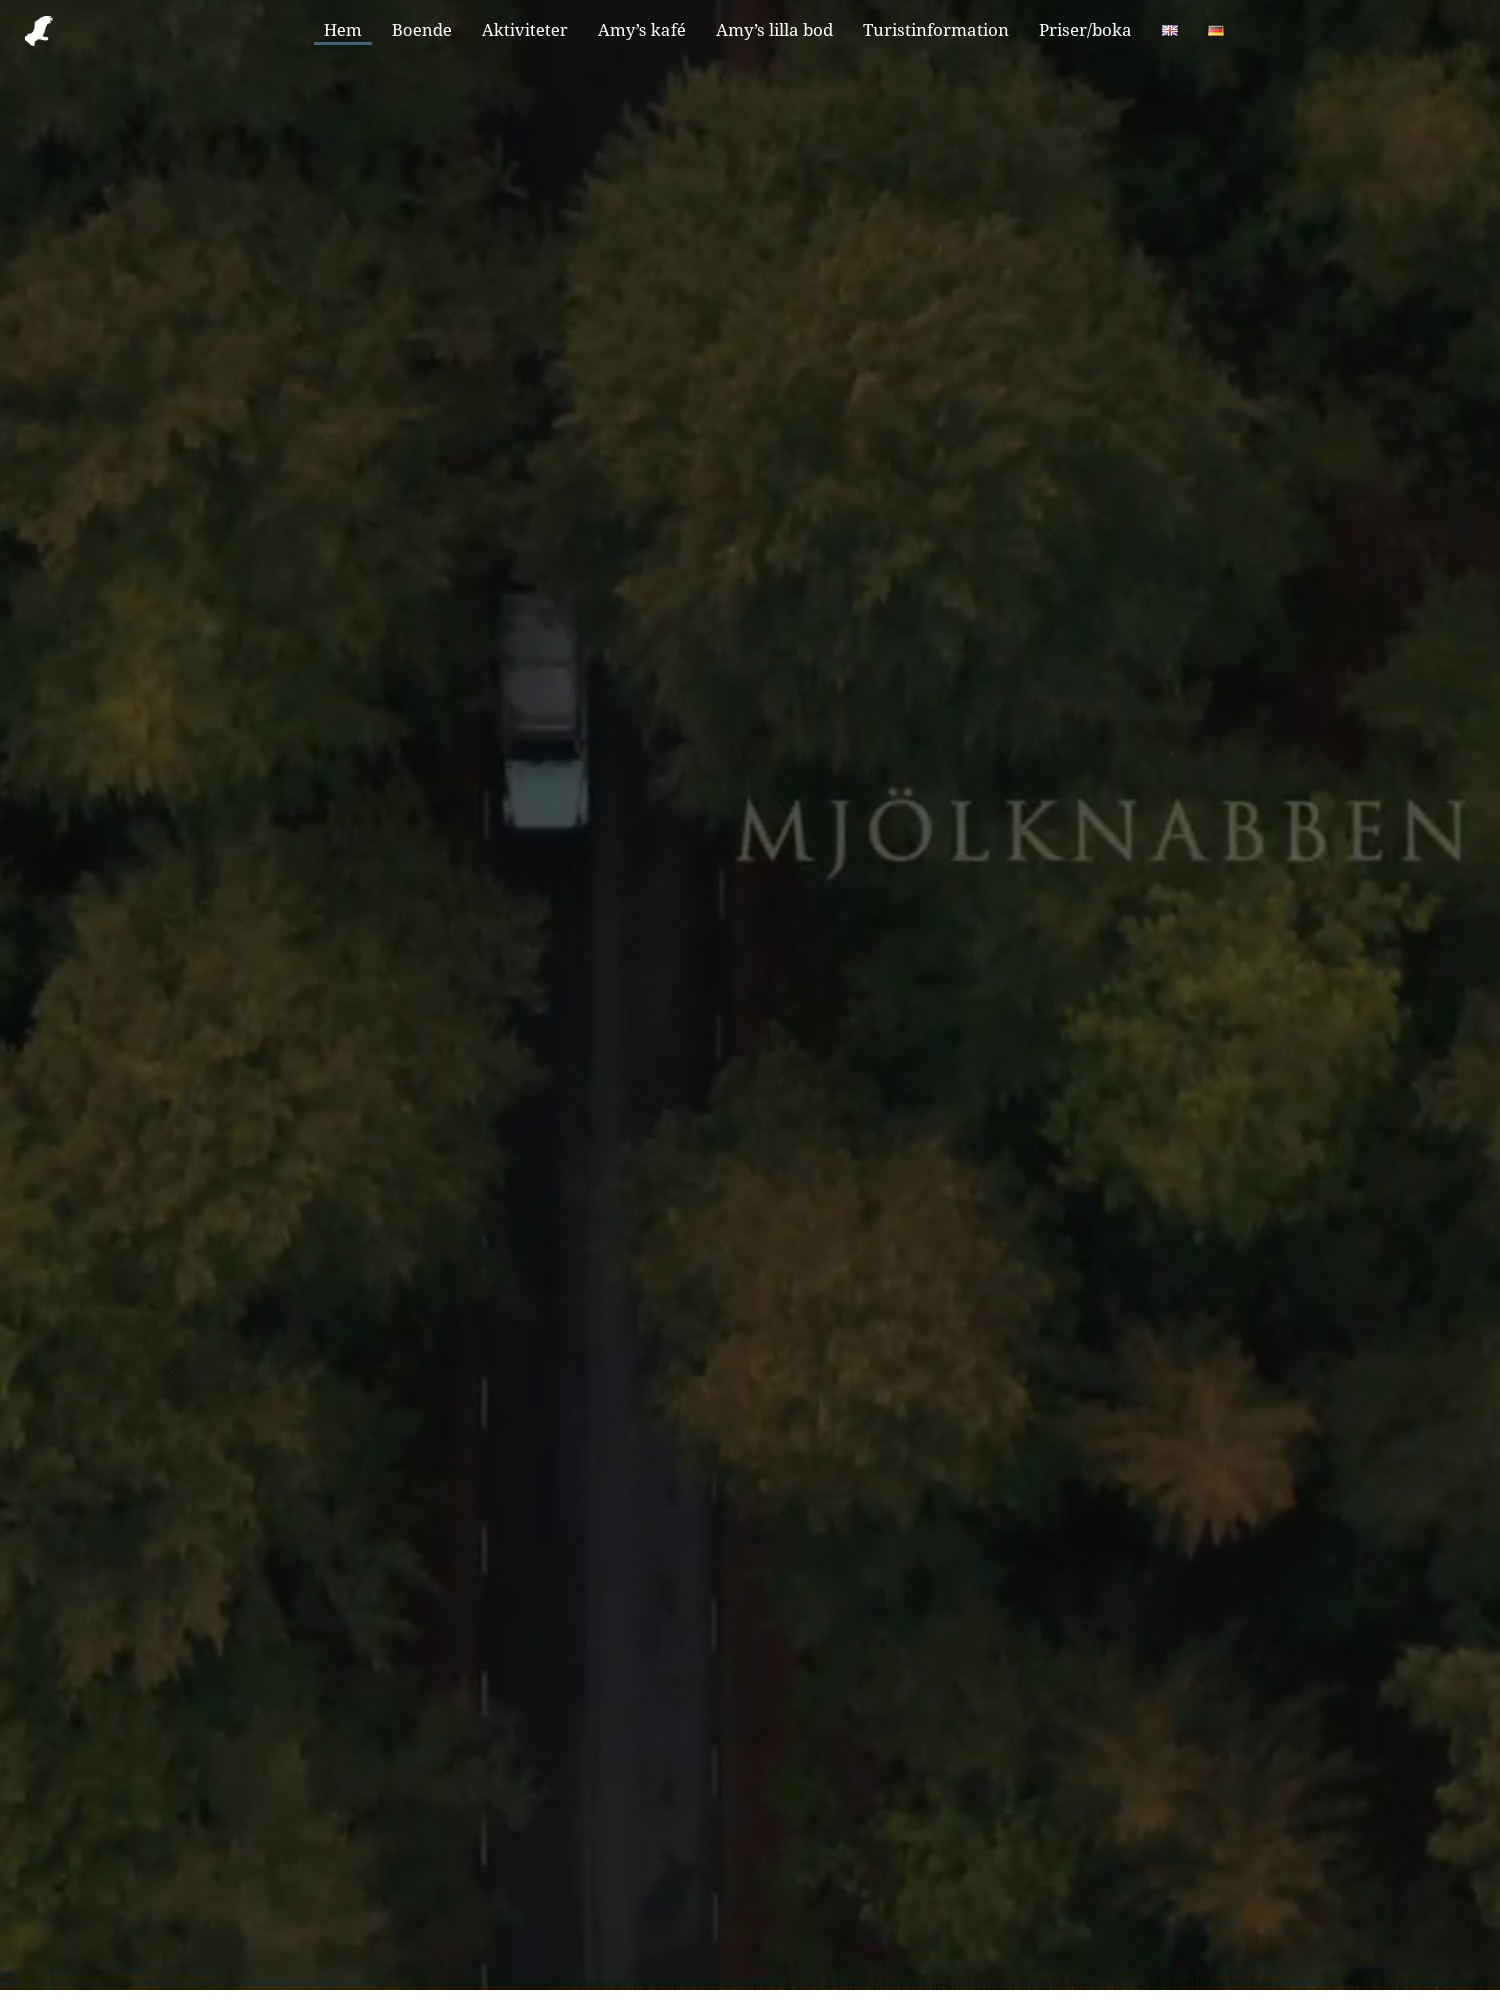 a car driving on a road surrounded by trees